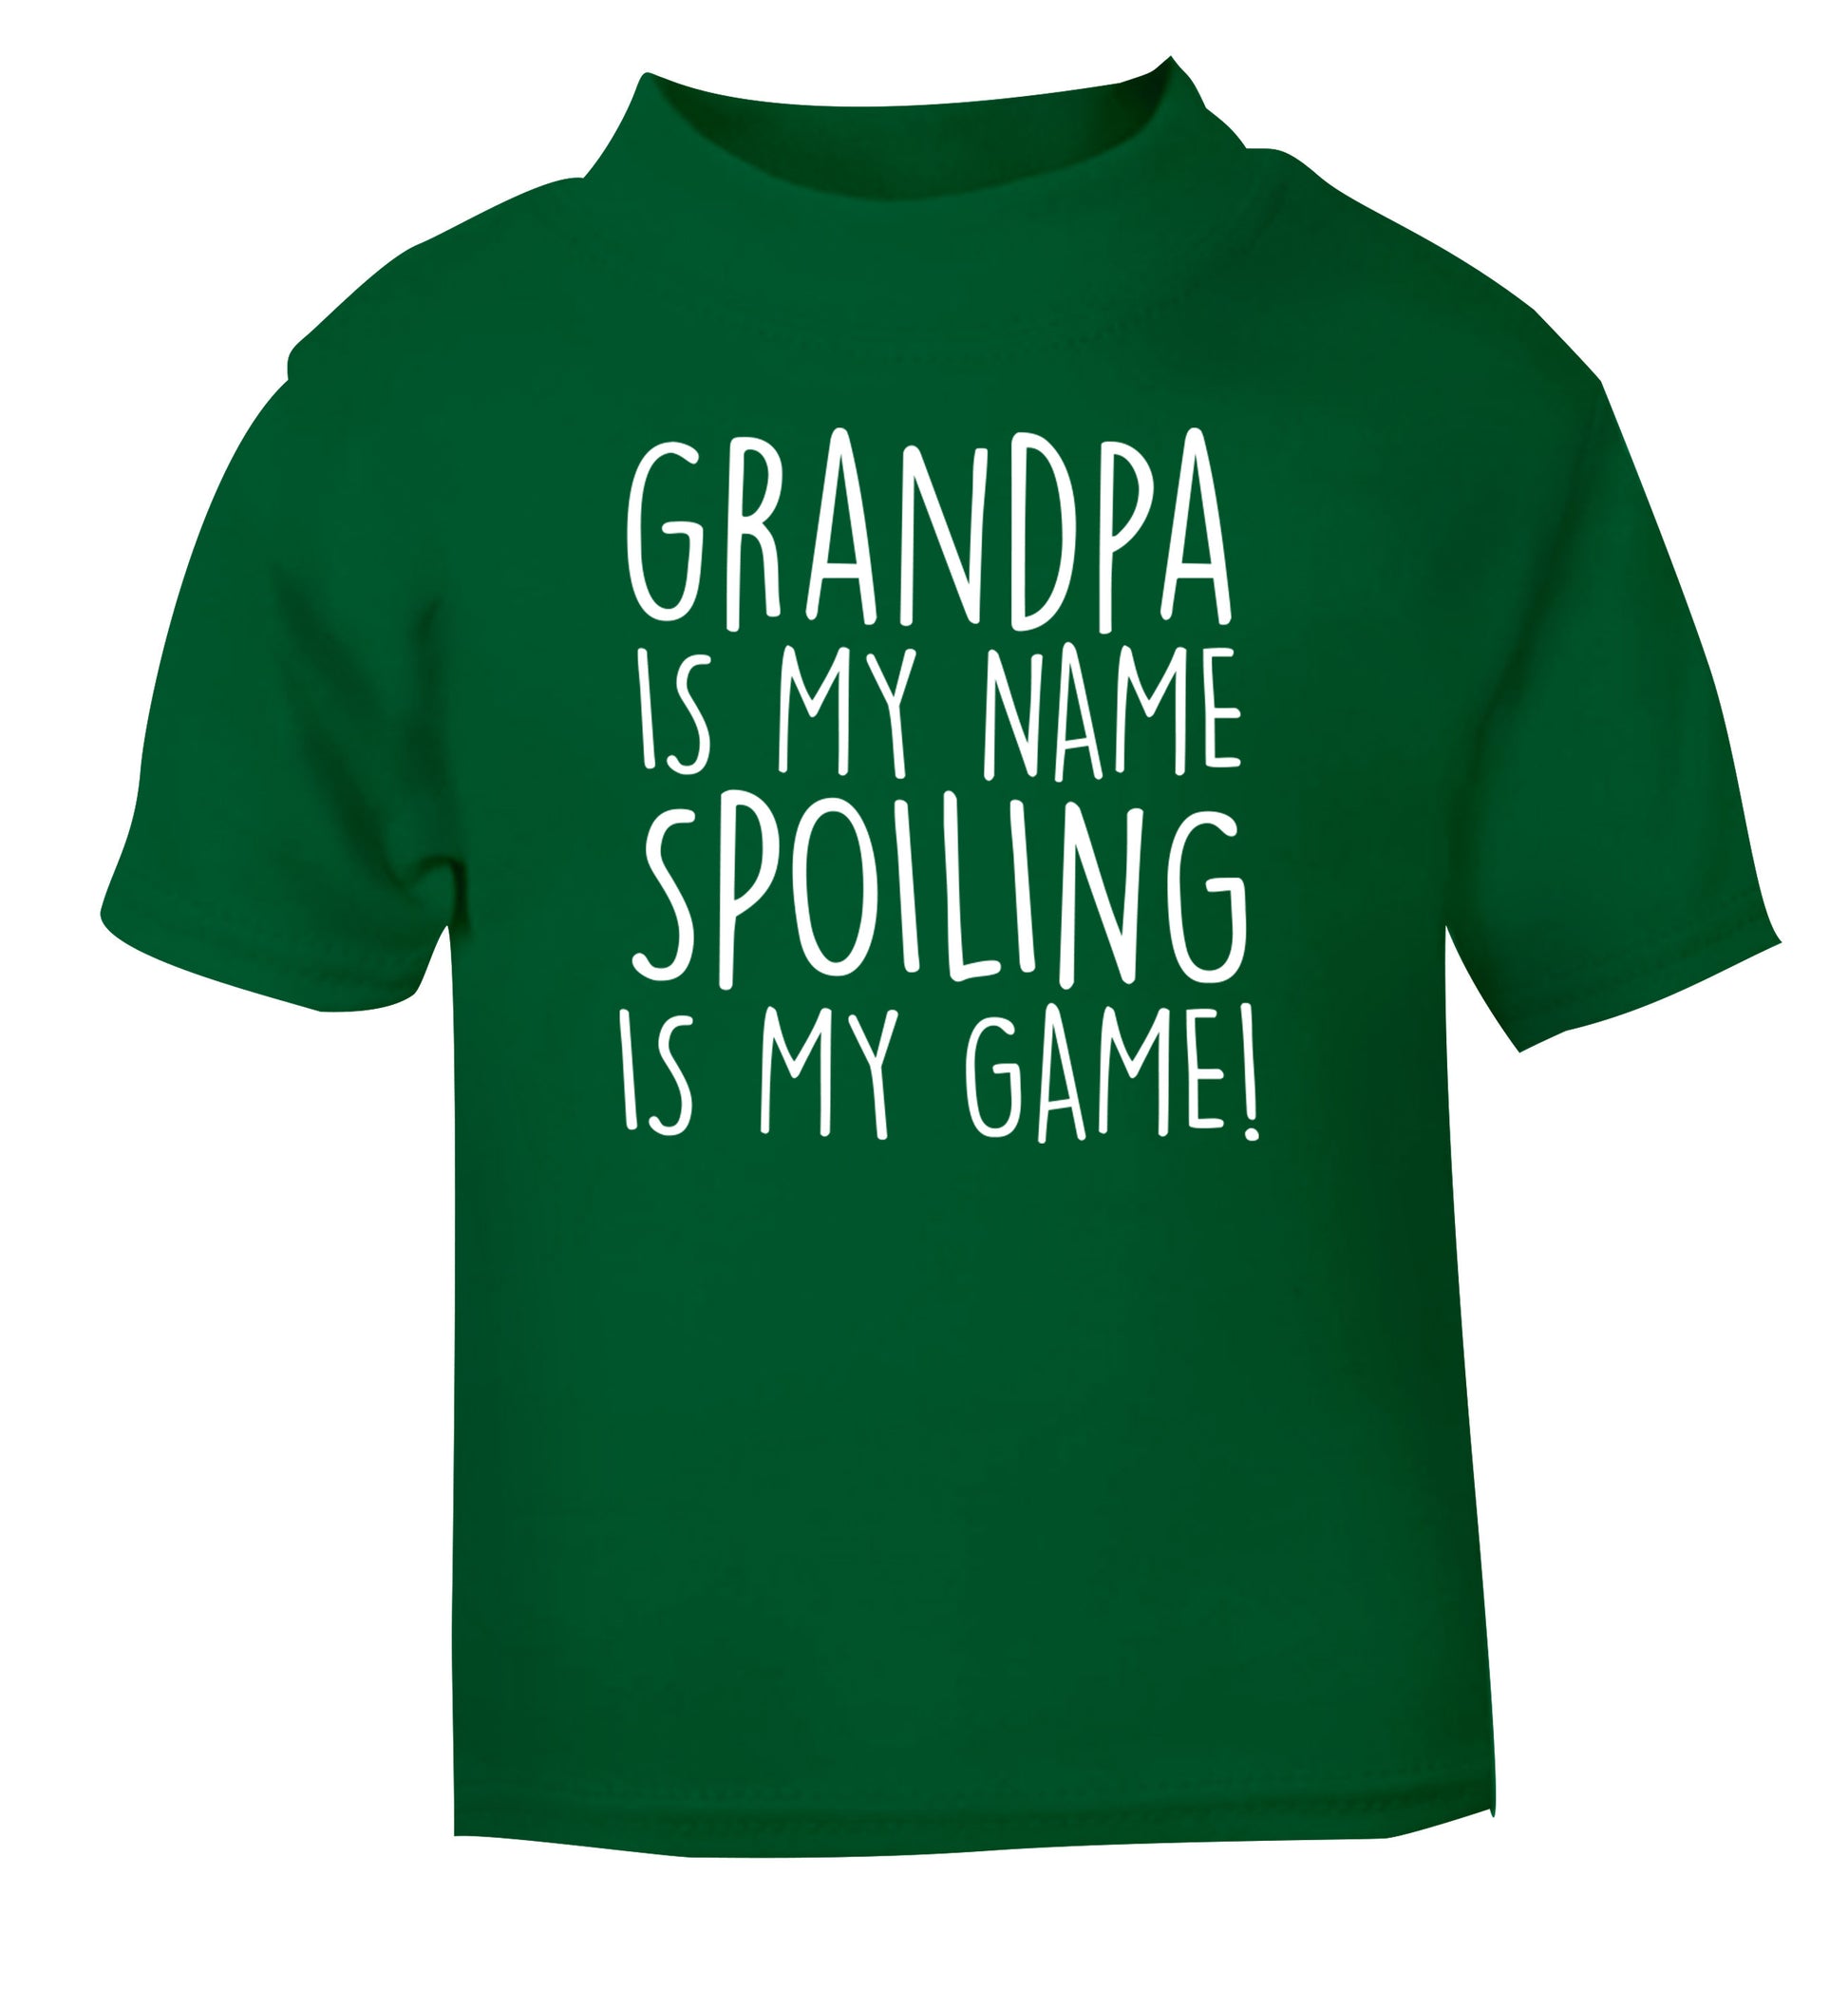 Grandpa is my name, spoiling is my game green Baby Toddler Tshirt 2 Years